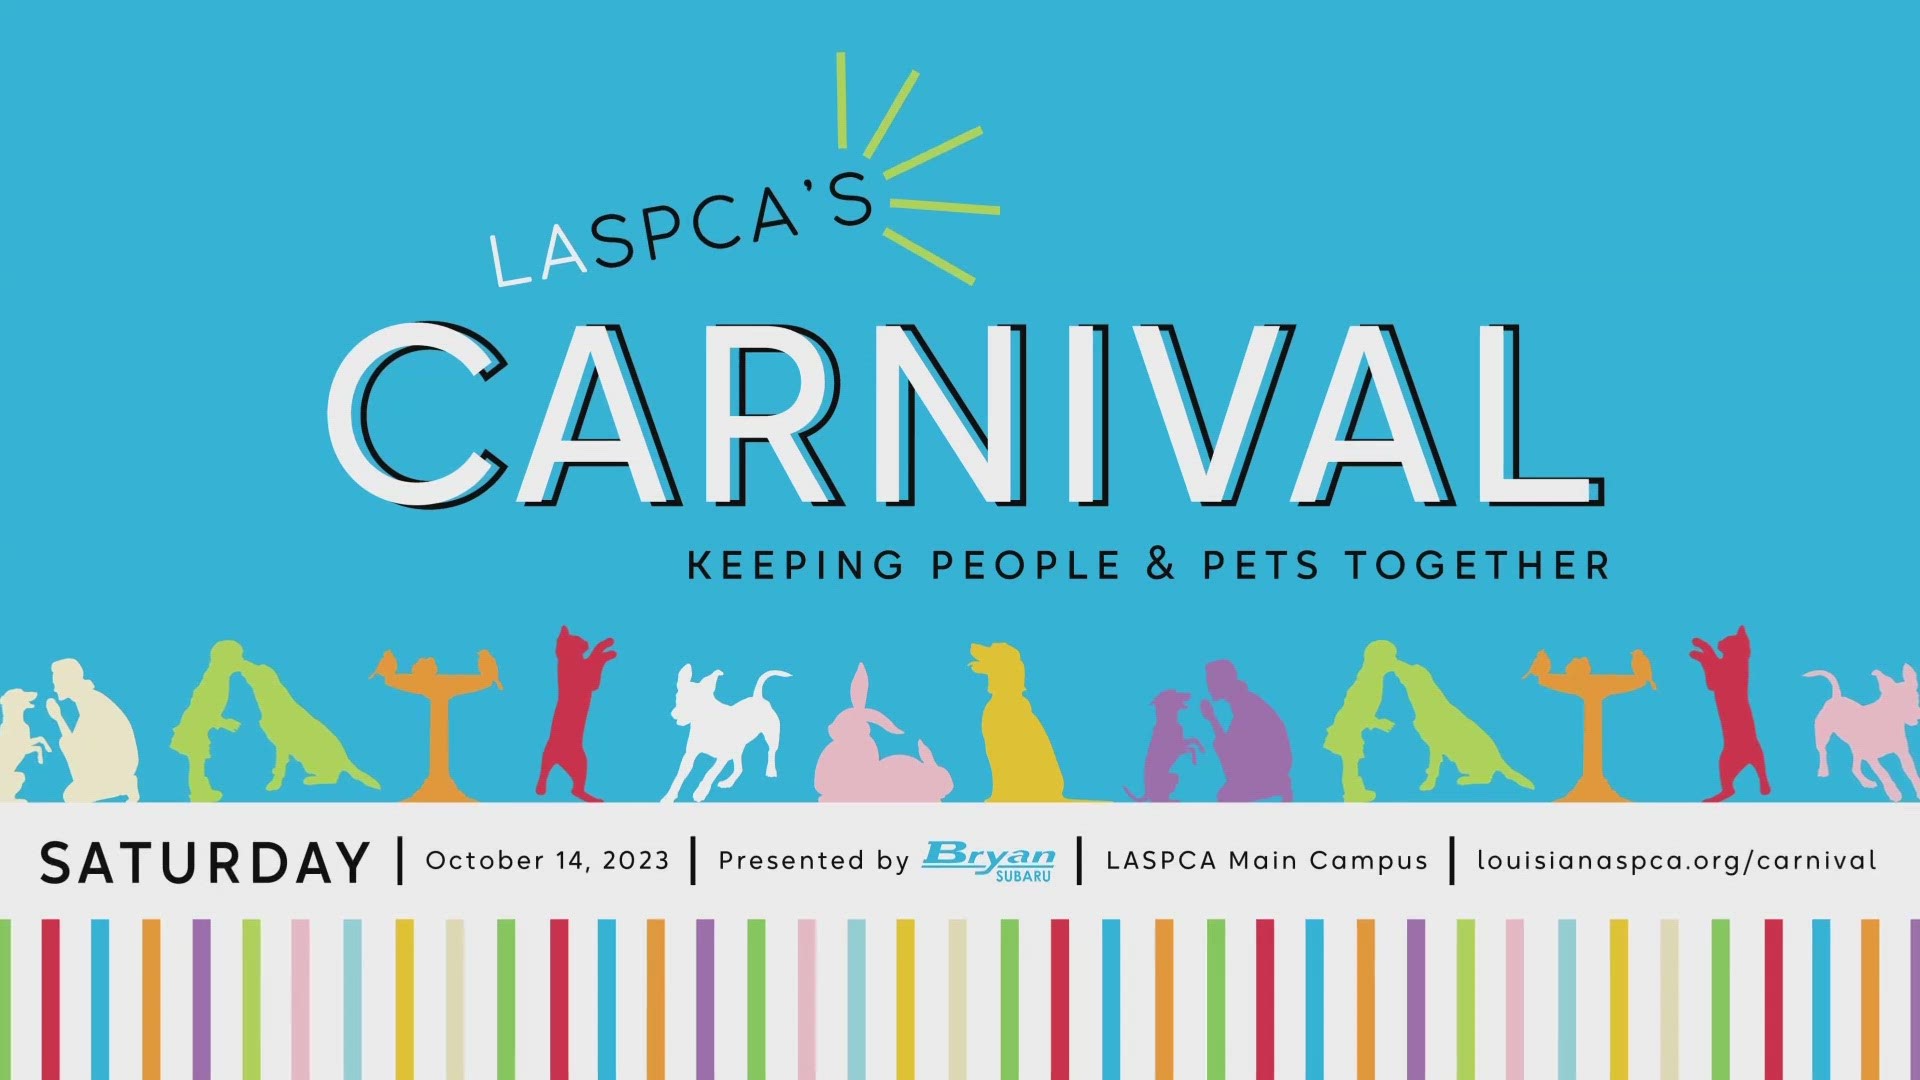 The Louisiana SPCA’s very first Carnival is on October 14th at 2 pm and is meant to celebrate the bond between pets and their people.